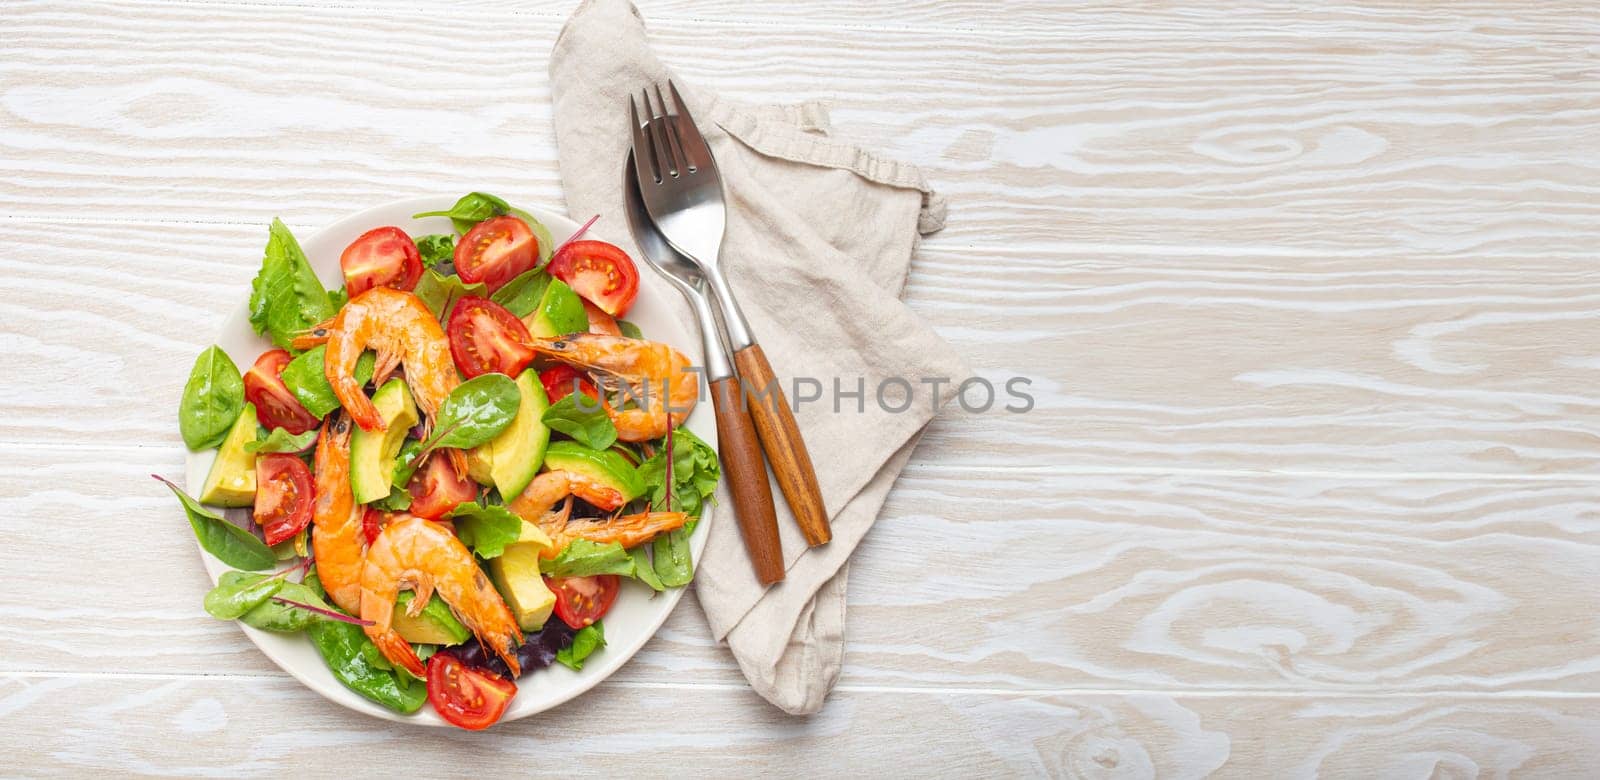 Healthy salad with grilled shrimps, avocado, cherry tomatoes and green leaves on white plate with cutlery on white wooden rustic background top view. Clean eating, nutrition and dieting, copy space. by its_al_dente